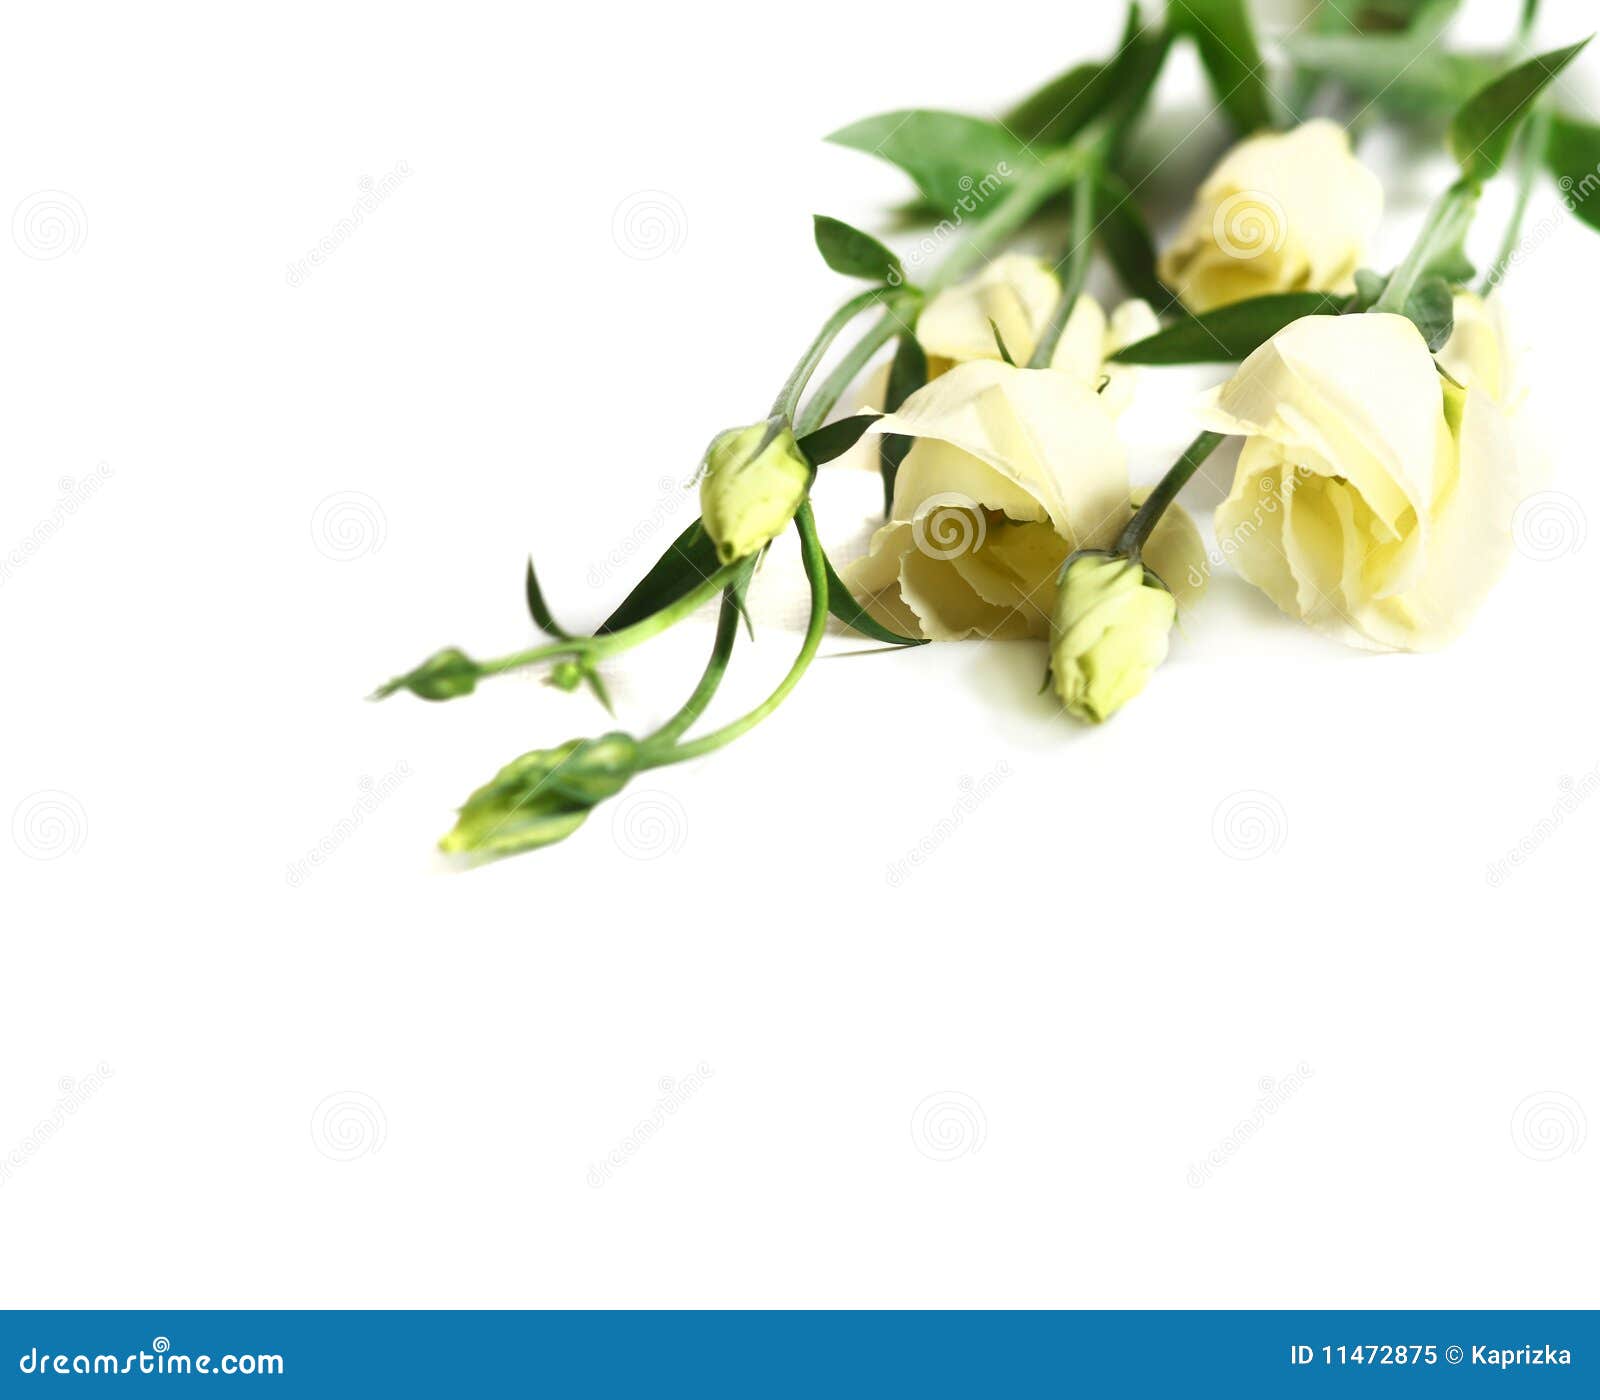 clipart delicate flowers - photo #36